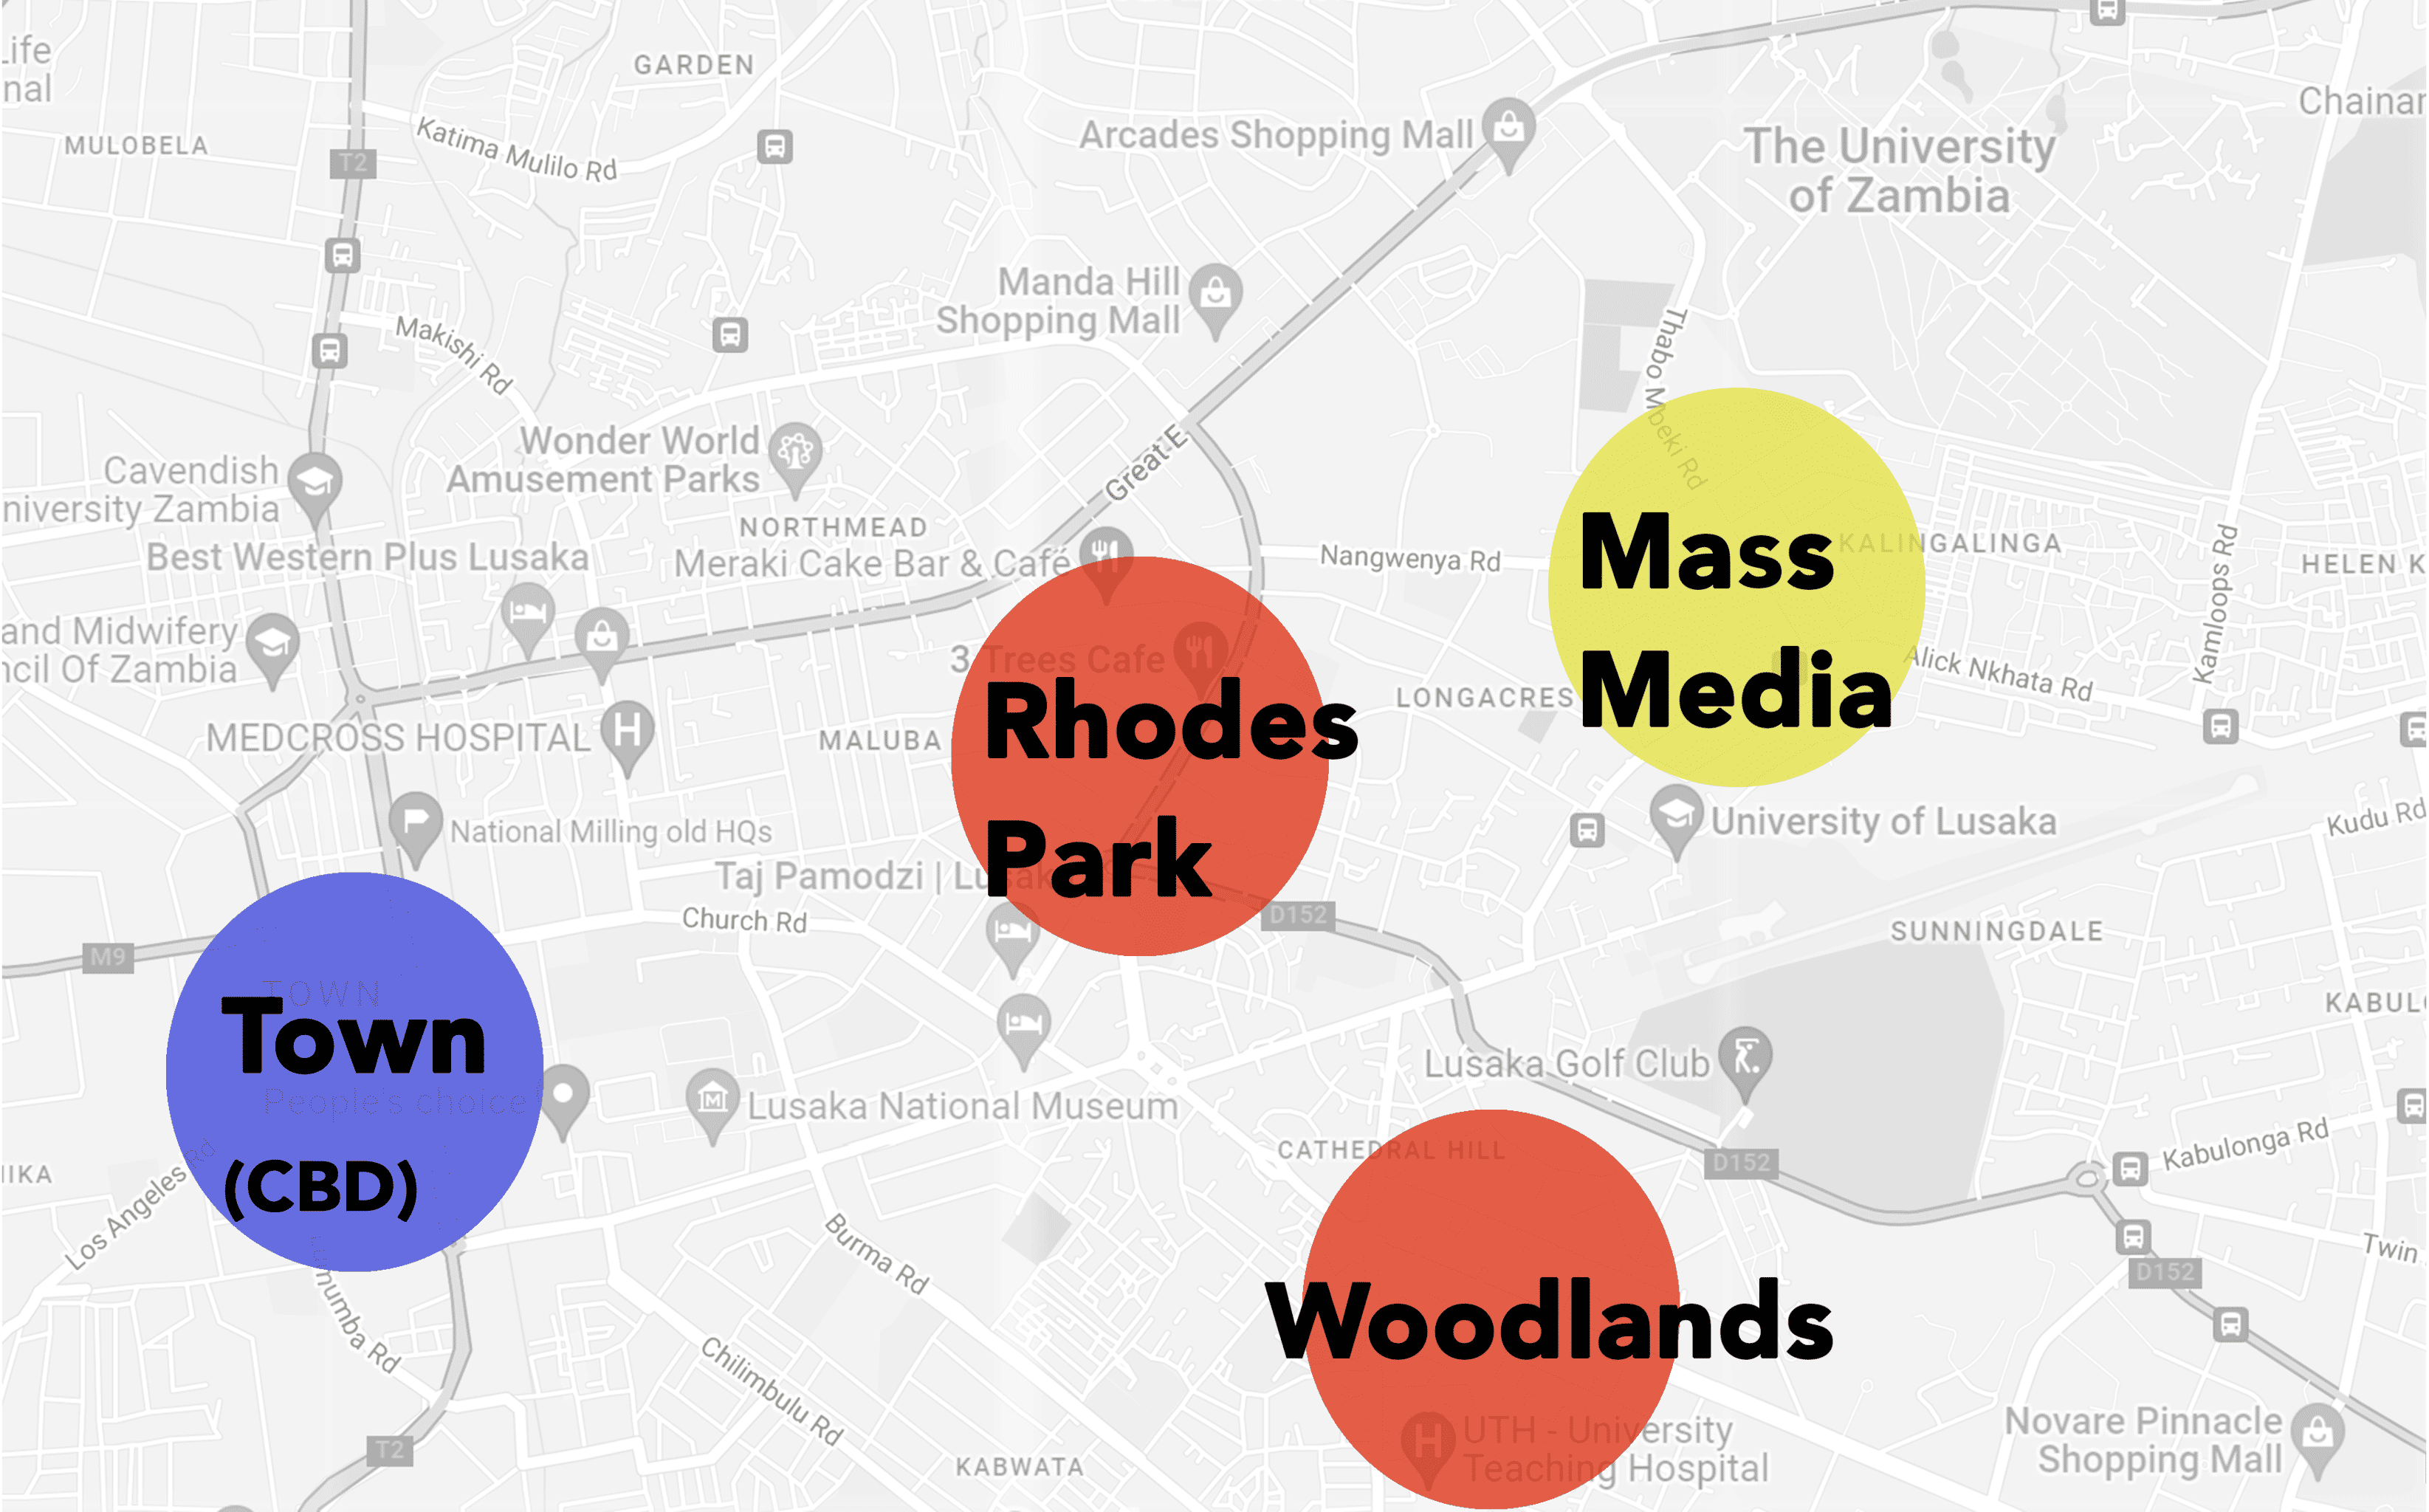 This map highlights the locations of woodlands and Rhodes park.